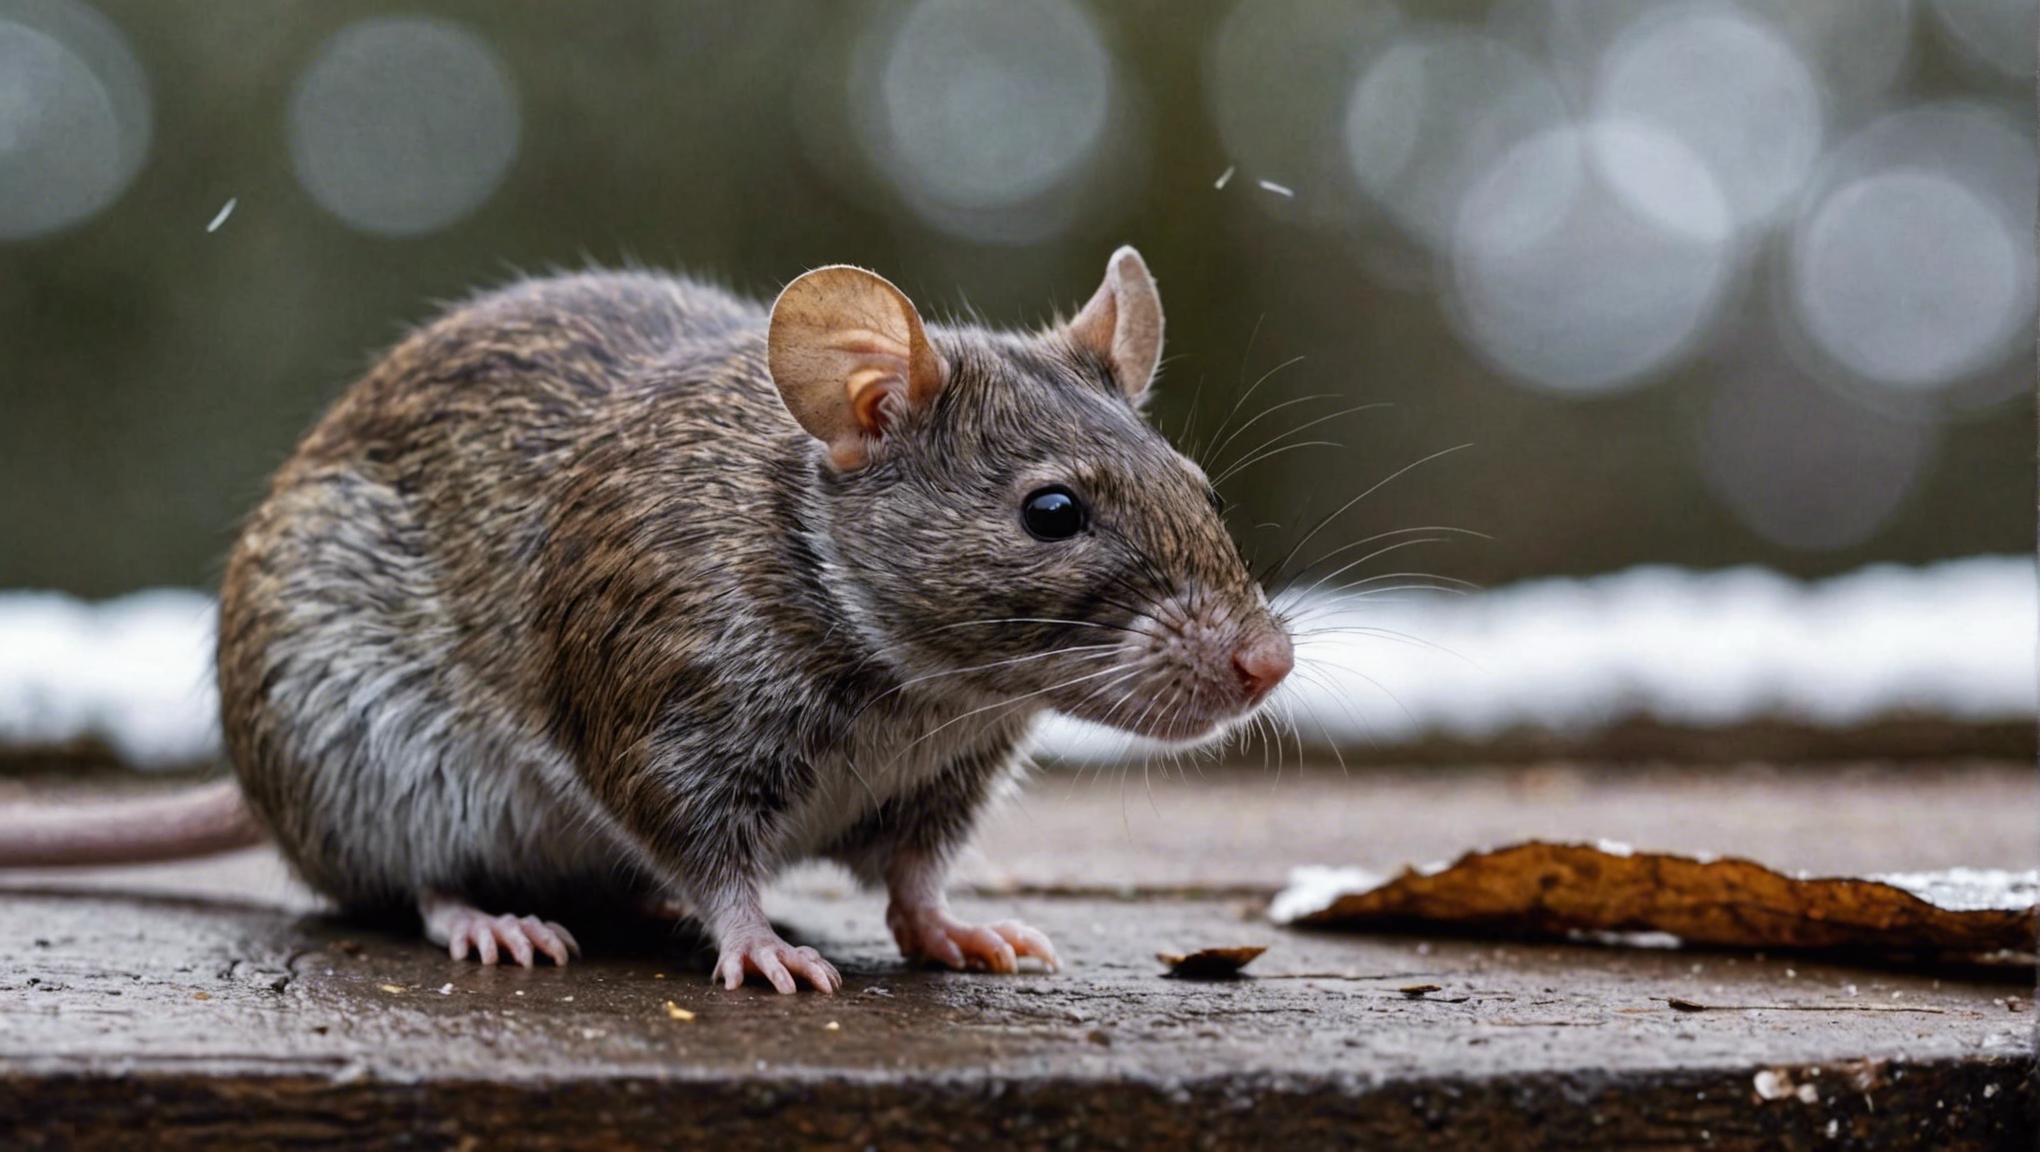 learn how to keep rats and mice out of your home this winter with these effective sealing methods.